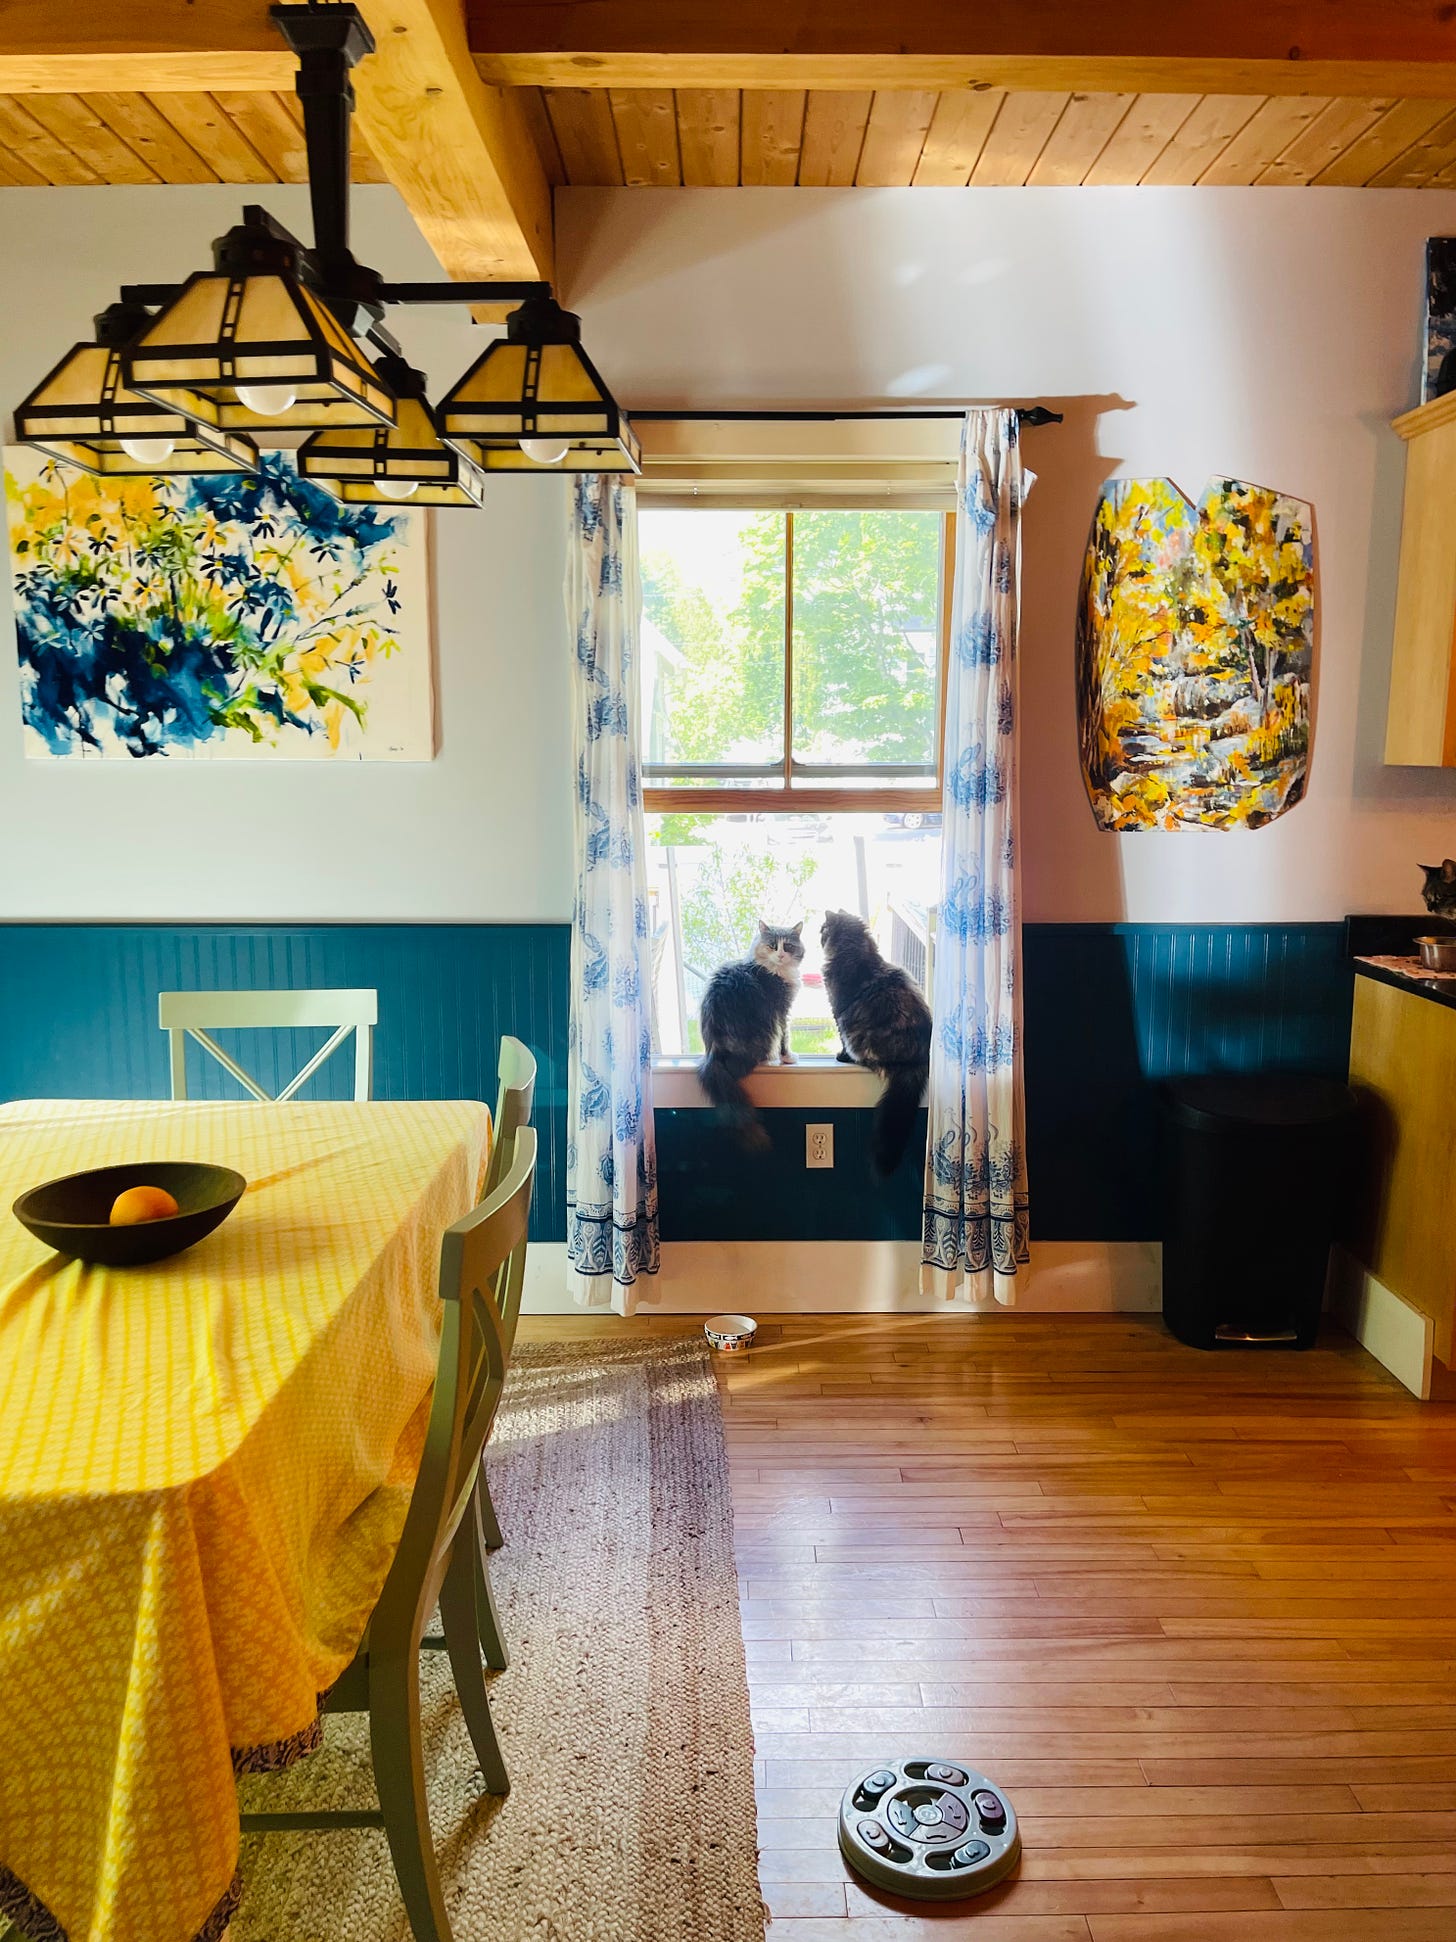 dining room scene, two cats in a window, one looking outside and one looking in